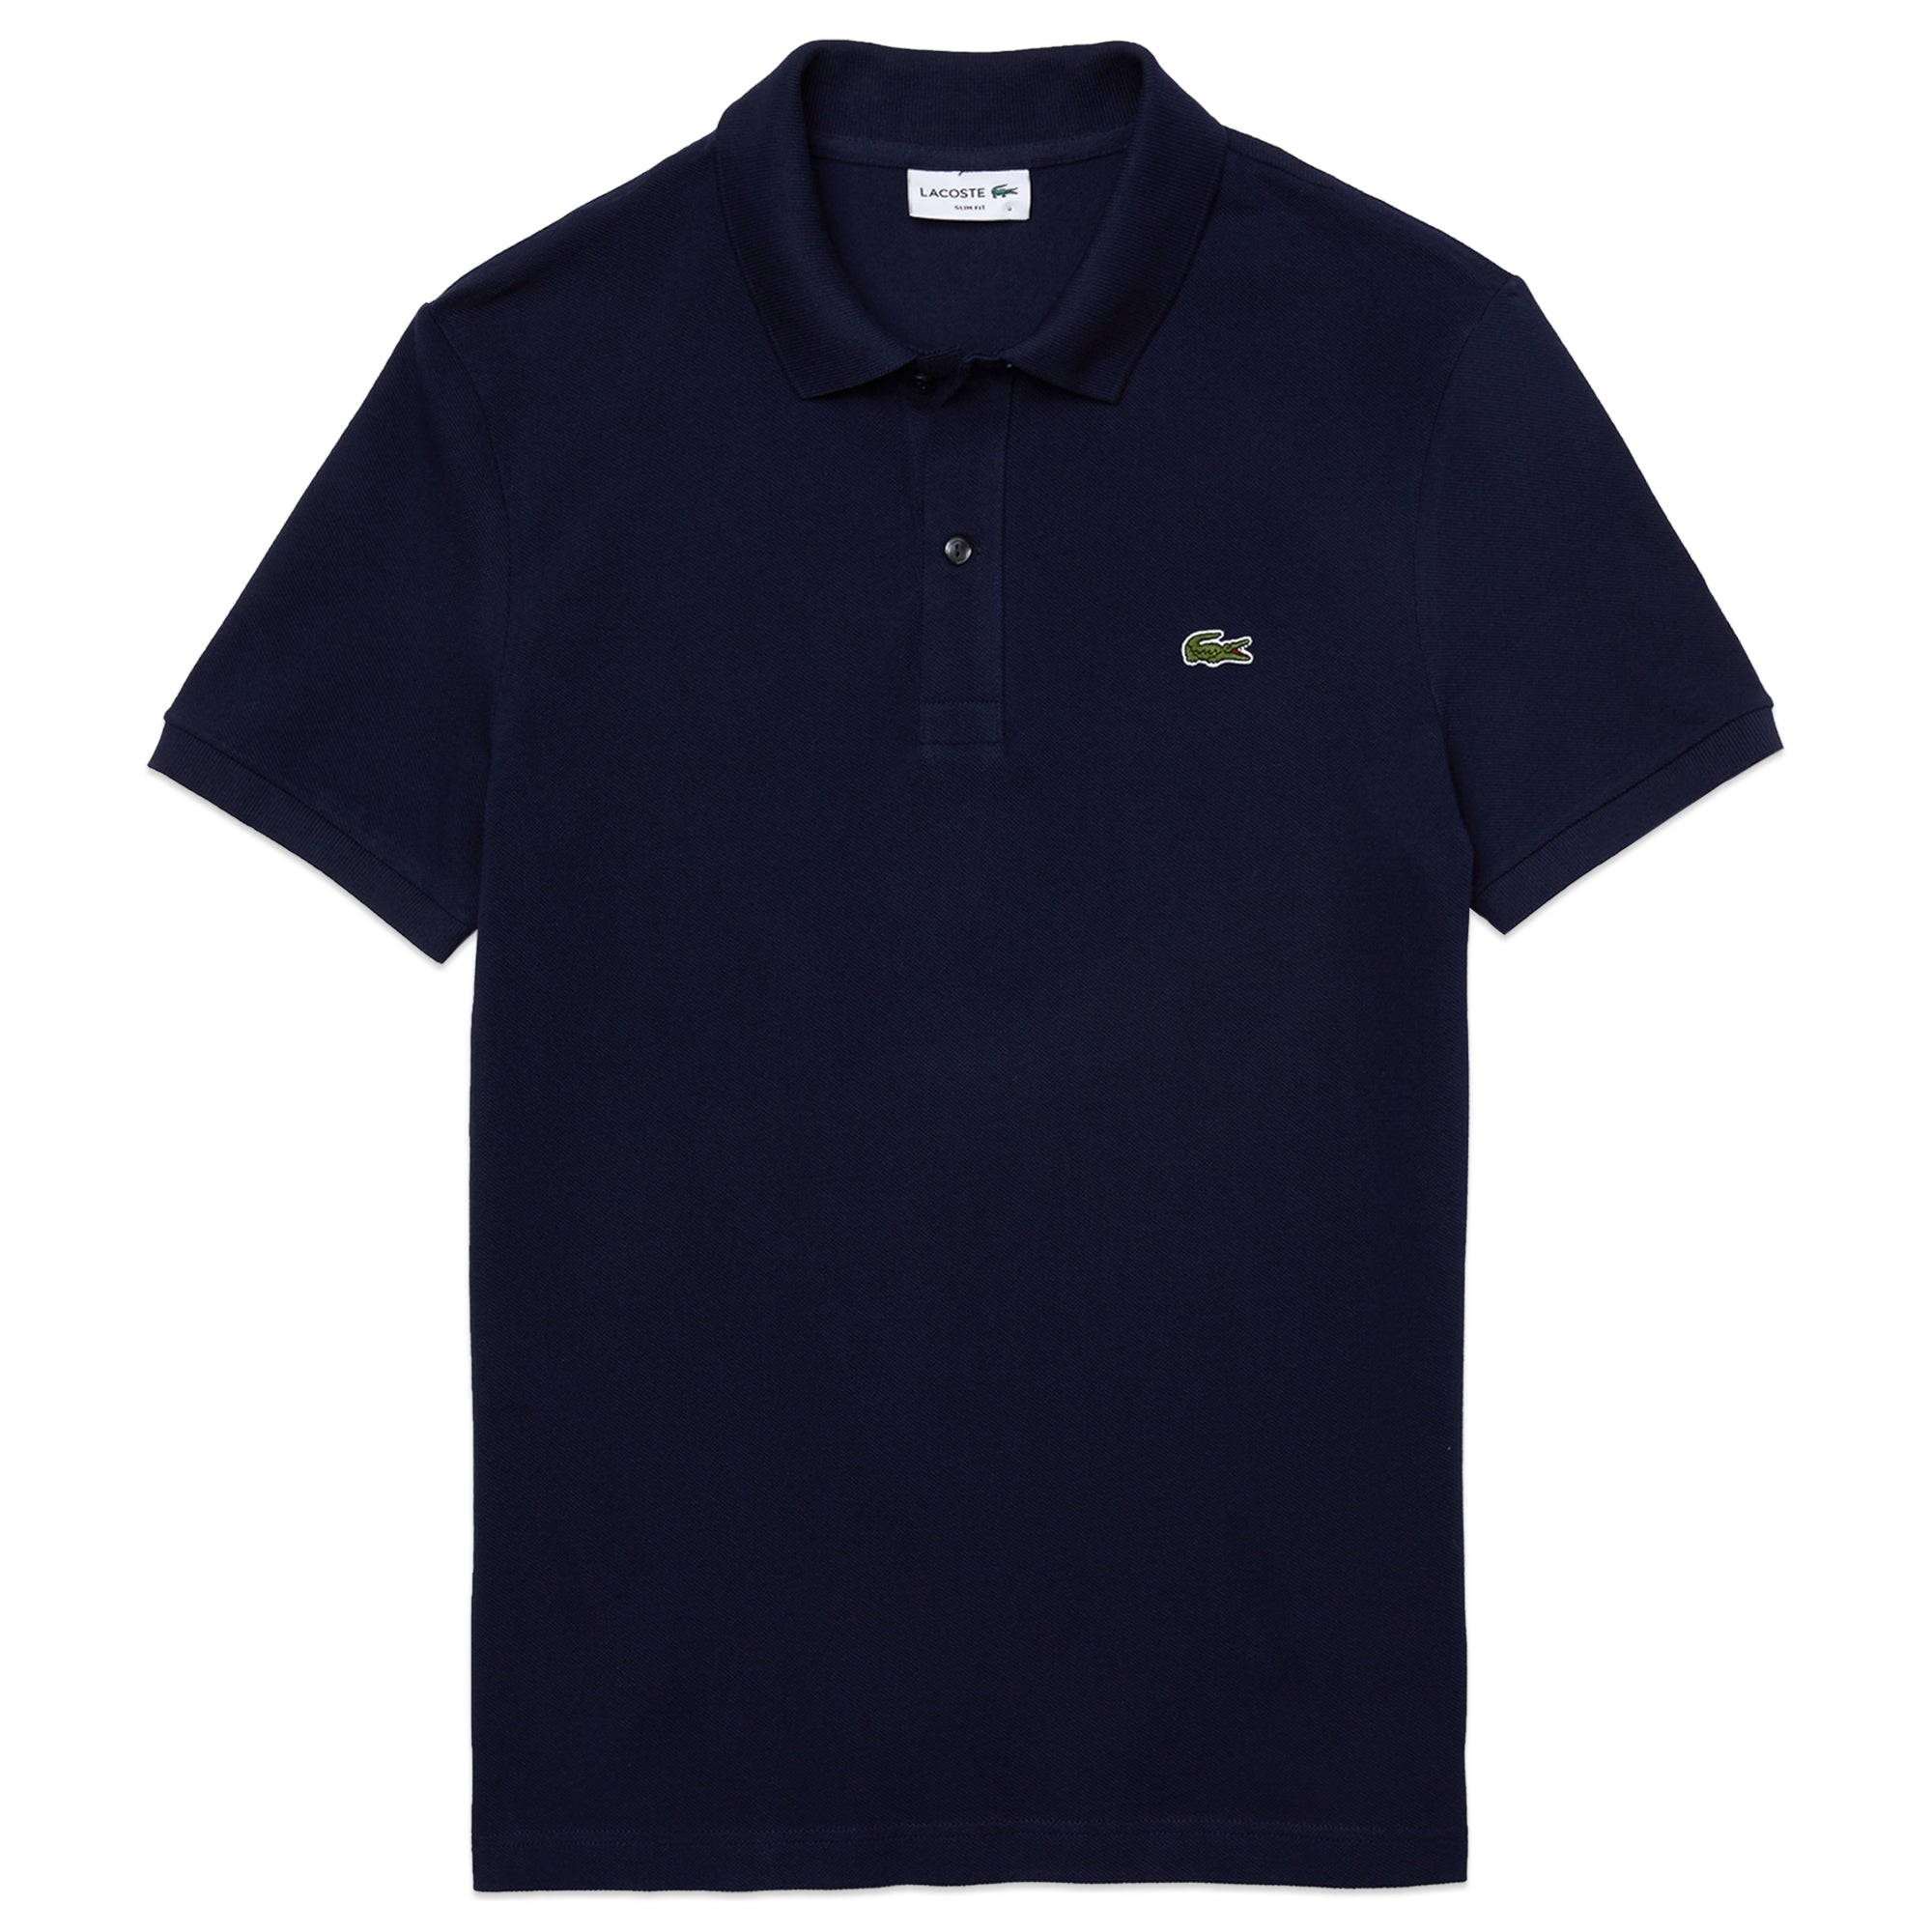 Lacoste Short Sleeved Slim Fit PH4012 Polo - Blue Argentina